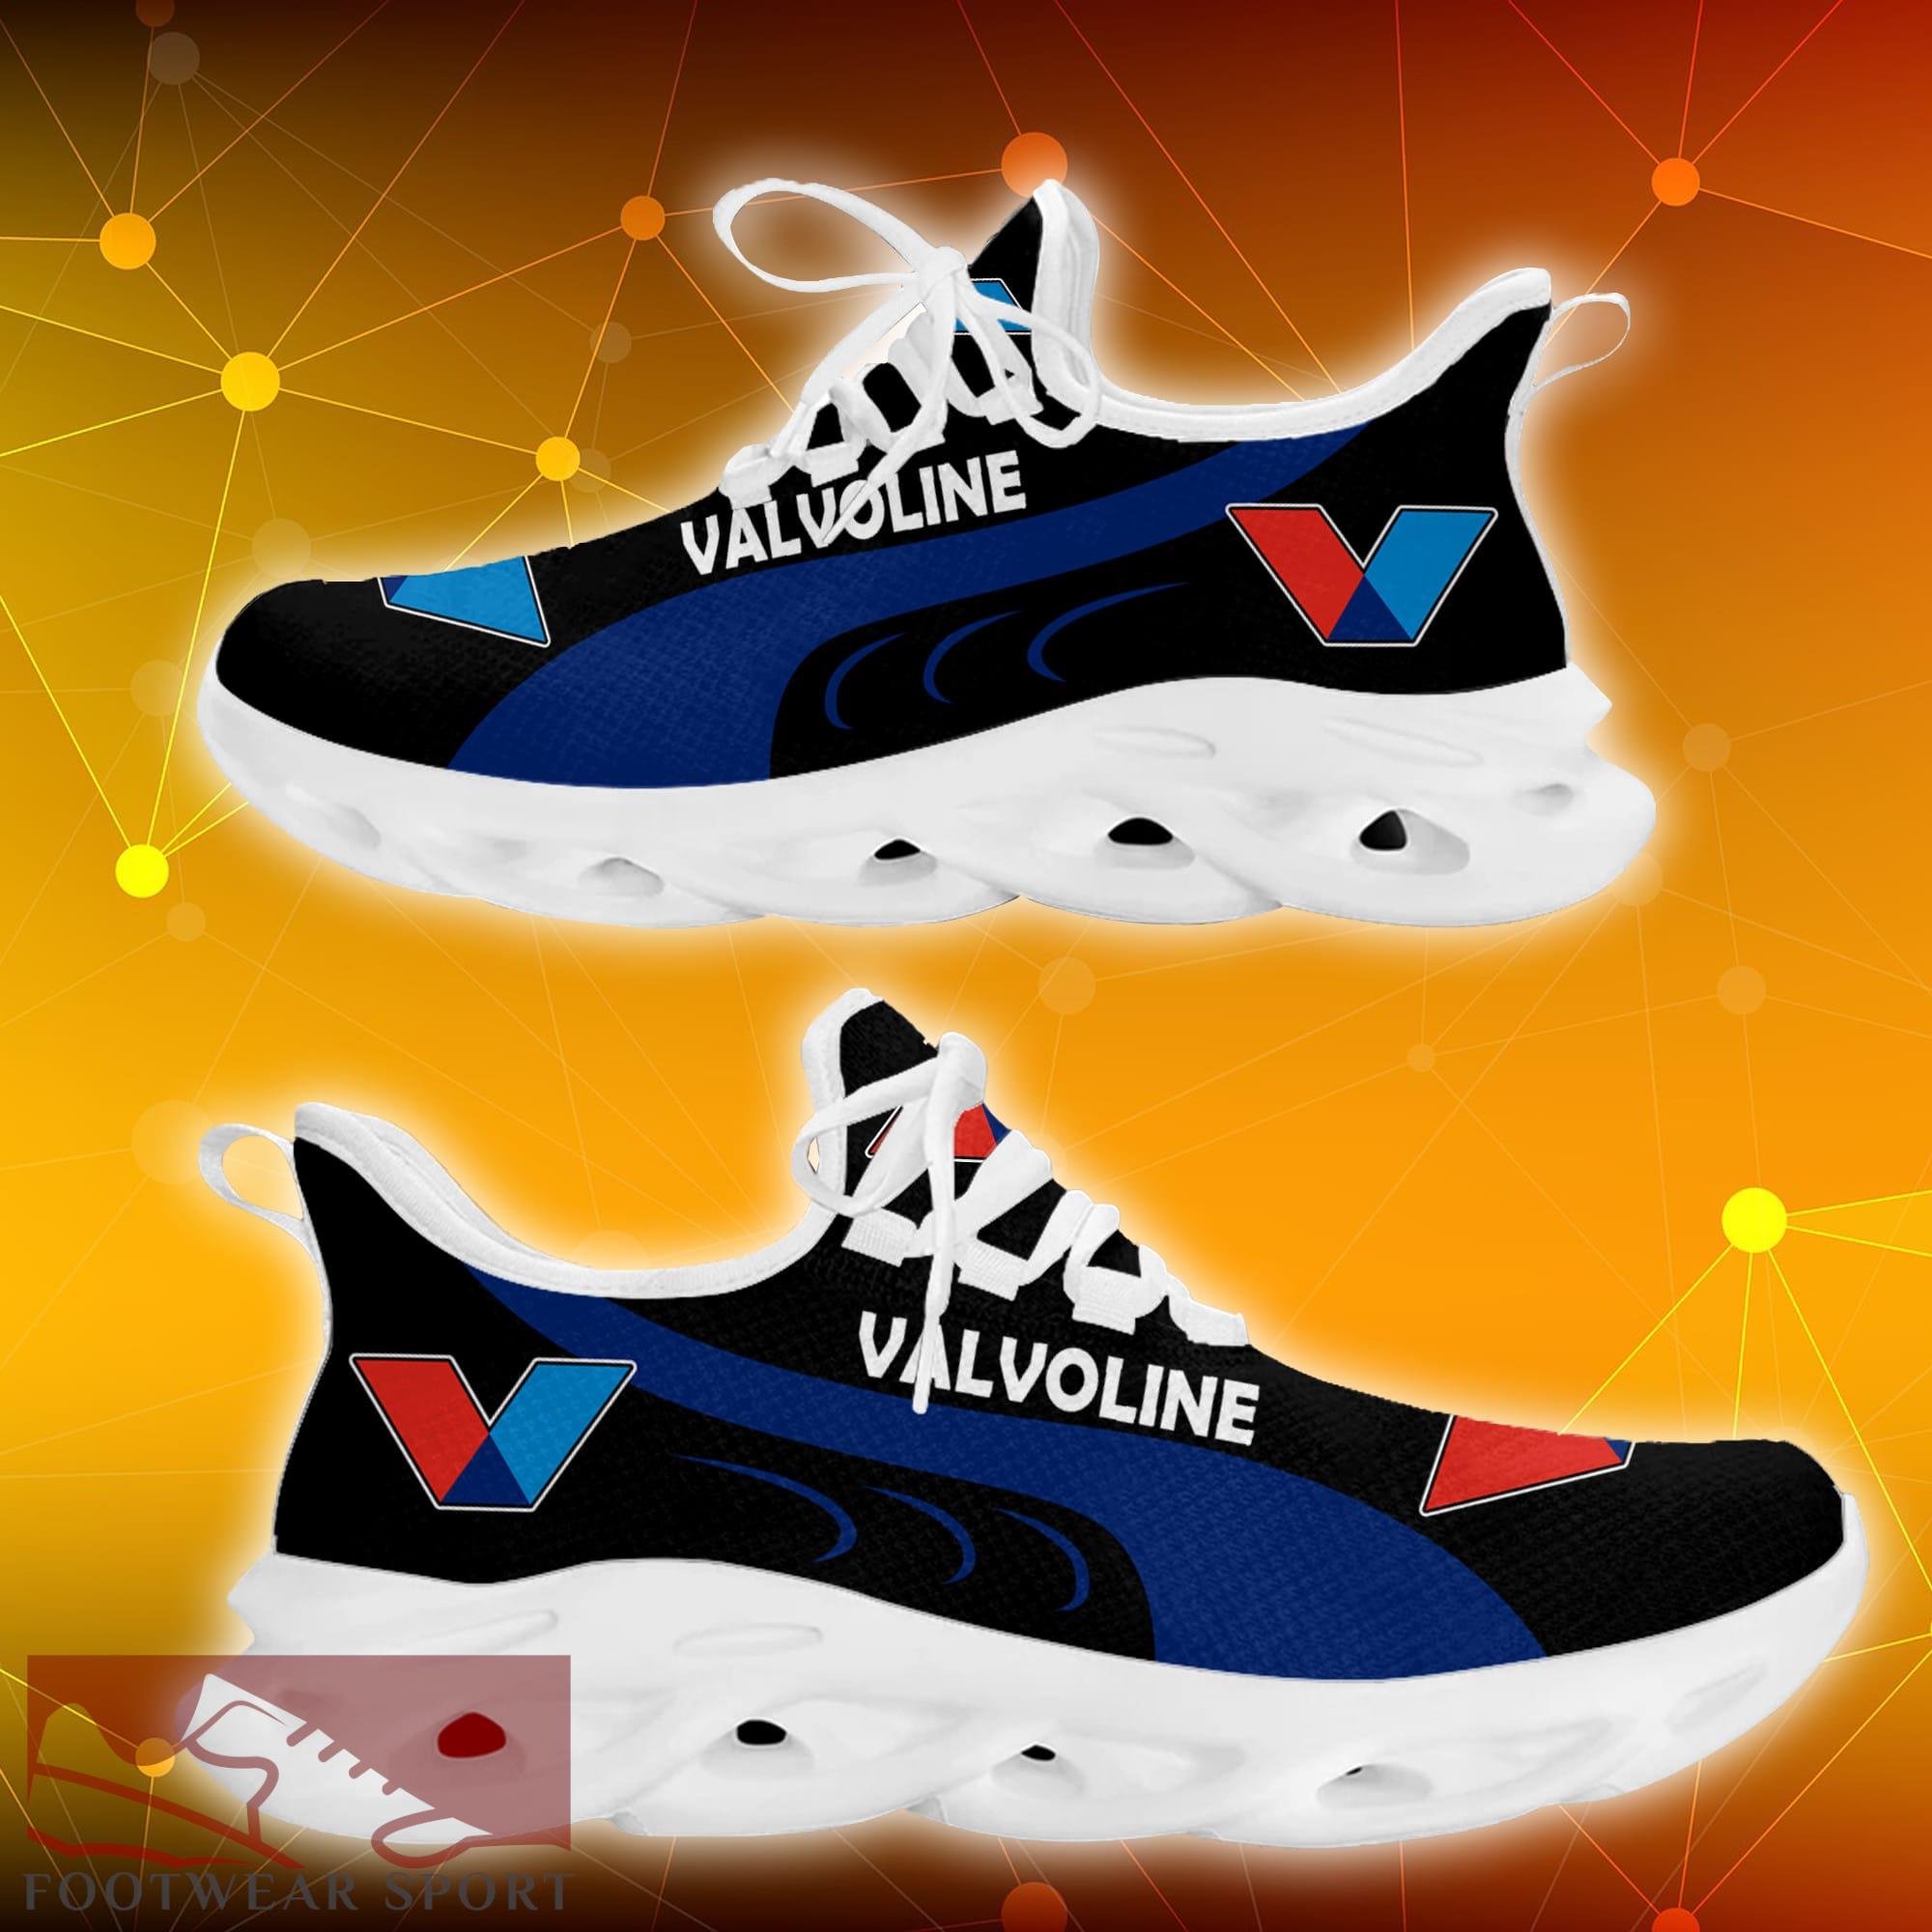 valvoline Brand New Logo Max Soul Sneakers Attitude Running Shoes Gift - valvoline New Brand Chunky Shoes Style Max Soul Sneakers Photo 2